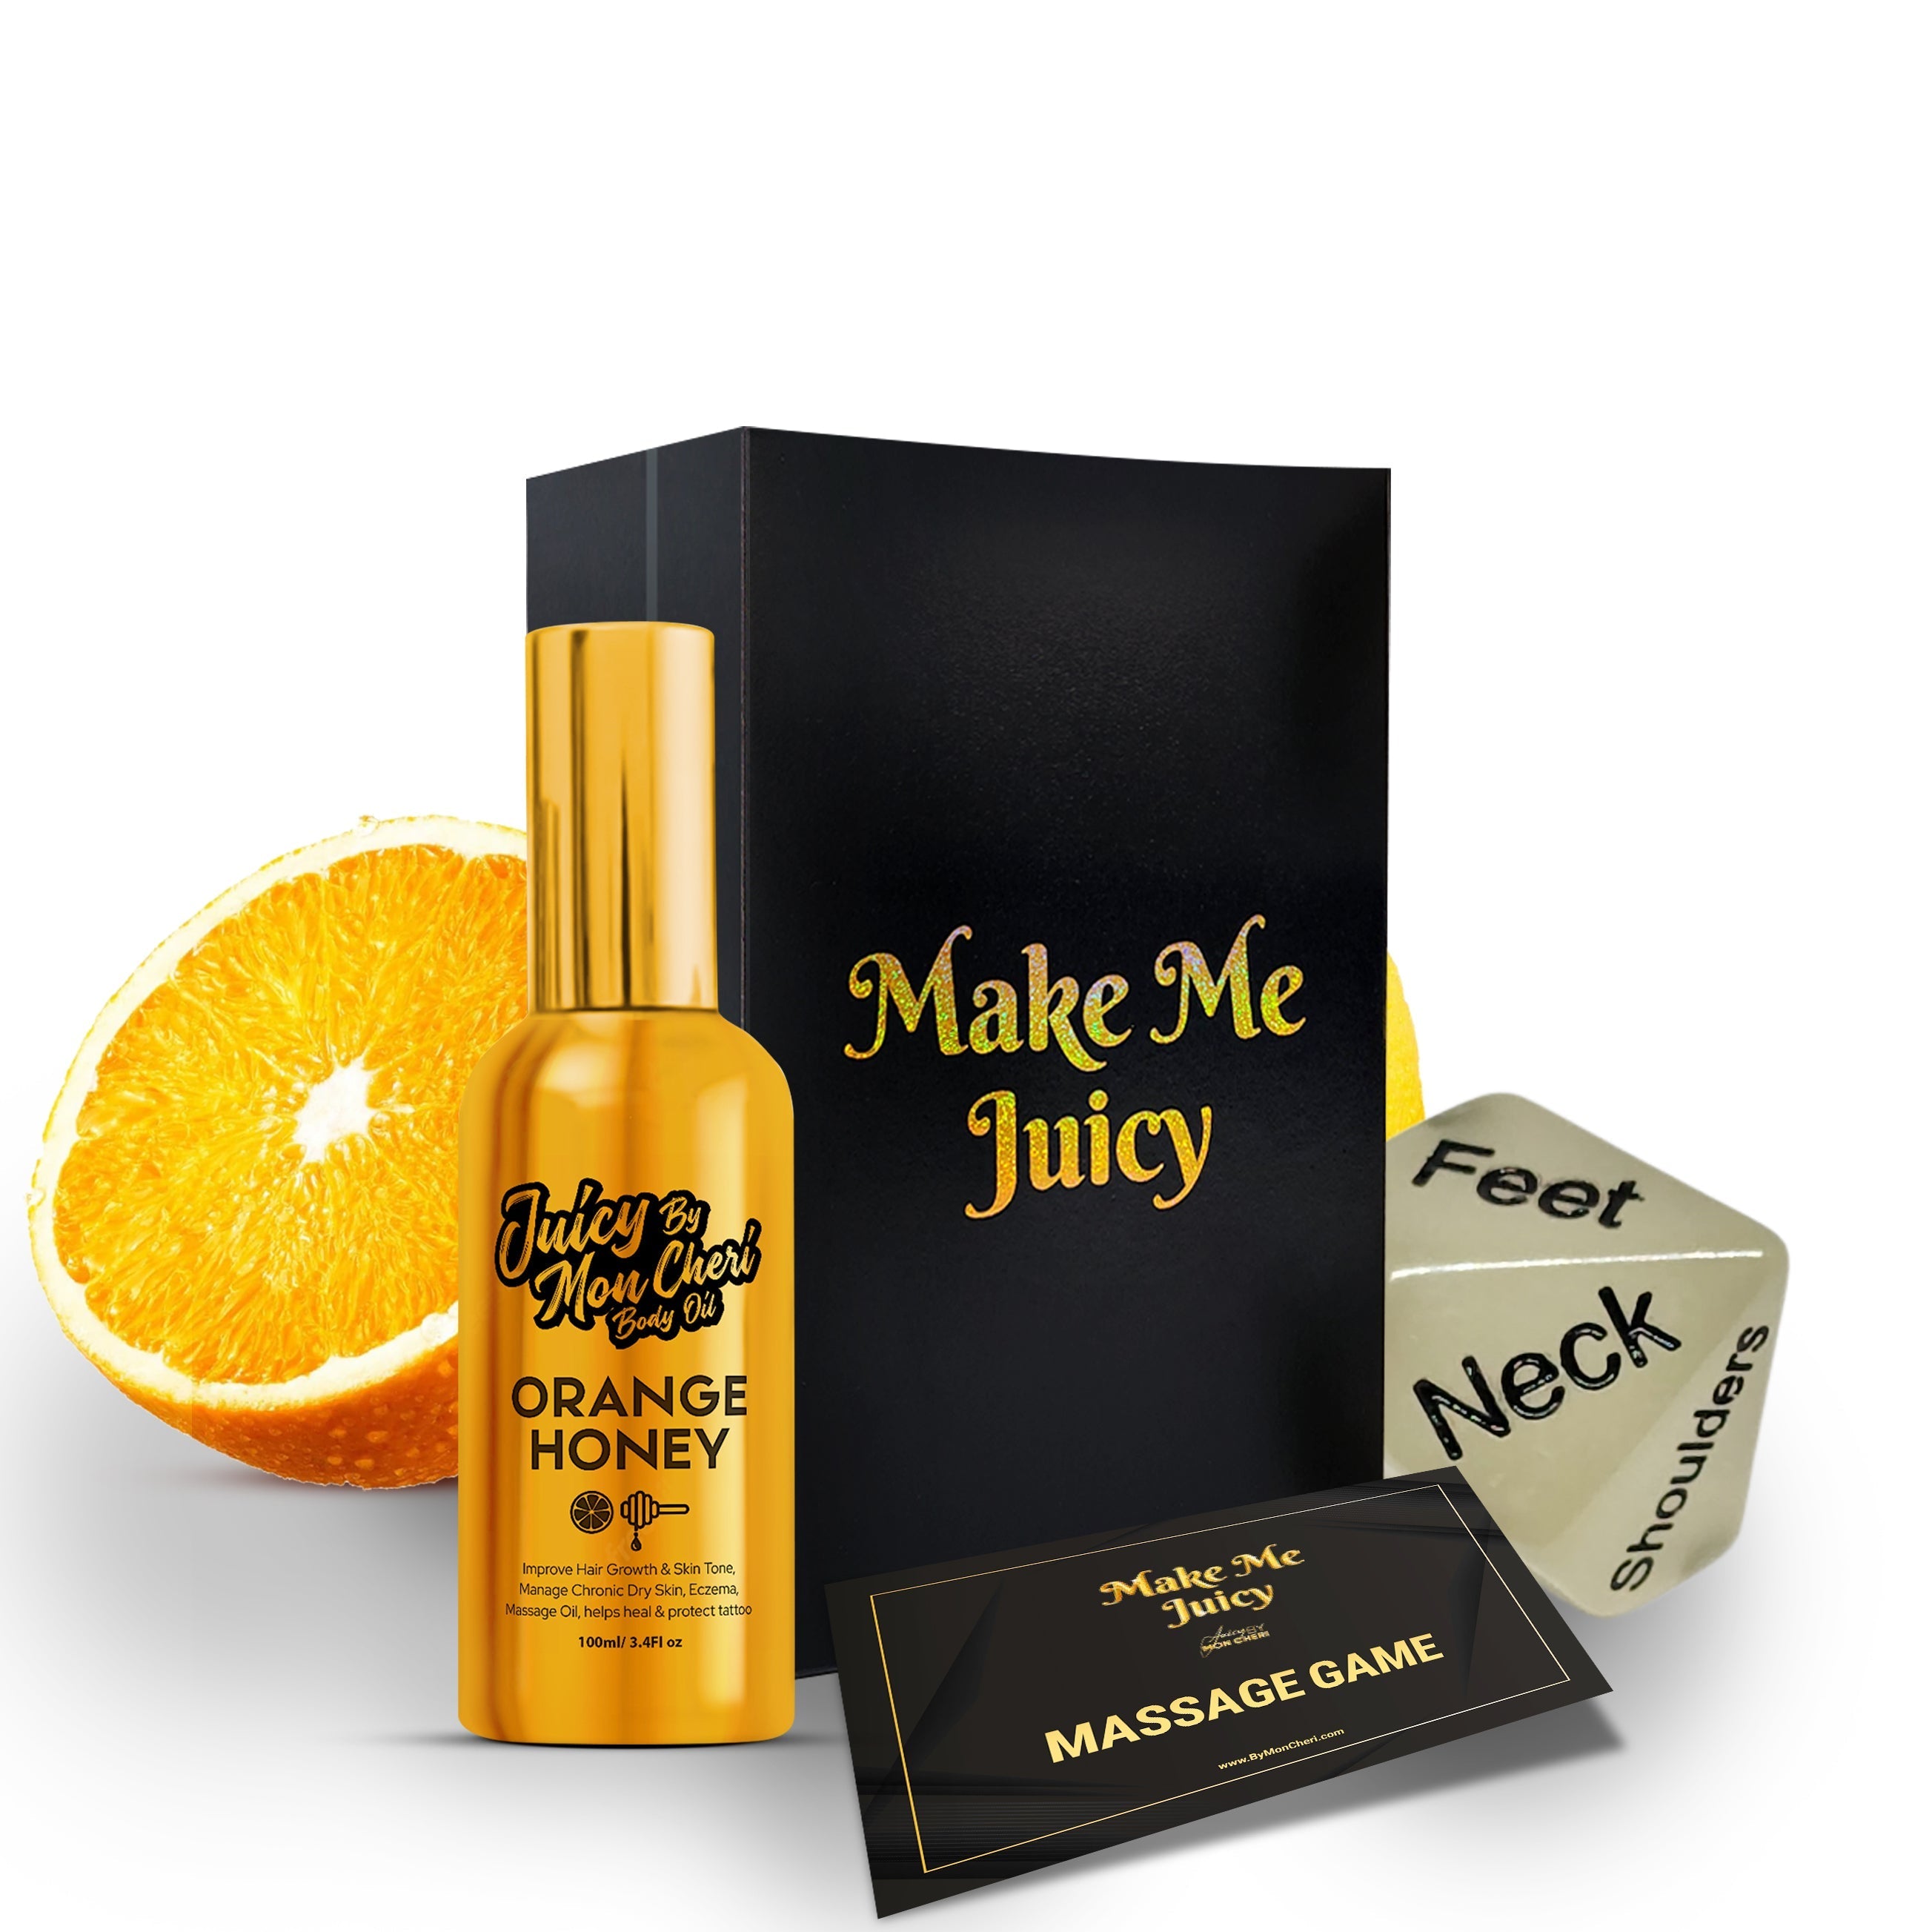 Massage Oil: Unleash Fun with Juicy by Mon Cheri's Couples Massage Oil and Rolling Dice Game